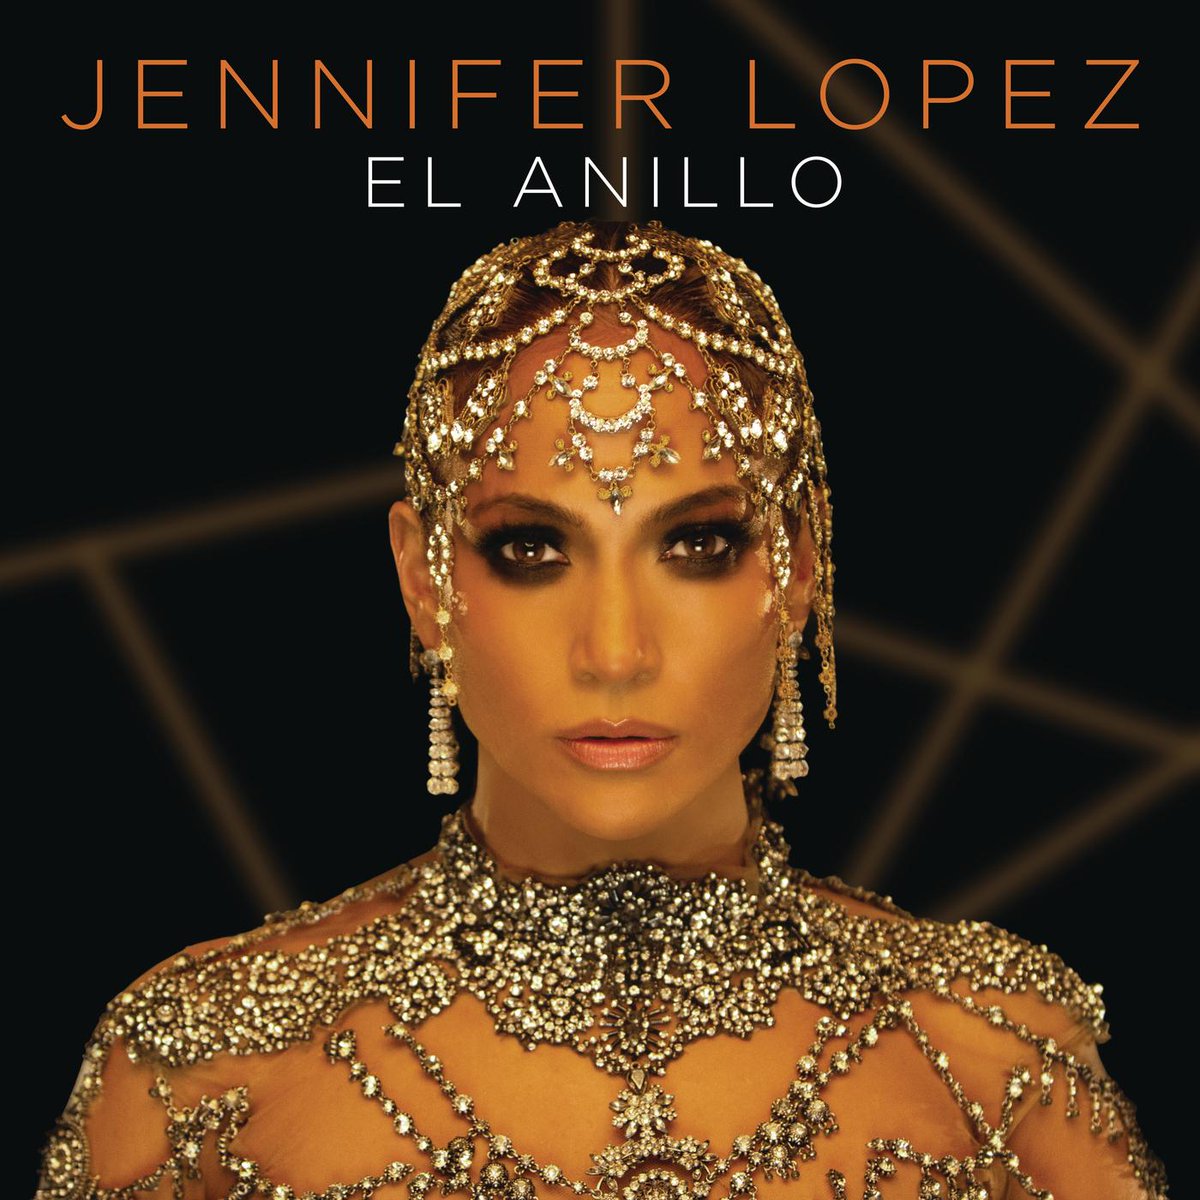 RT @TIDAL: .@jlo is all about the ???? in her vibrant new single “El Anillo”: https://t.co/657J1vGKxc https://t.co/pUAzja0mf8